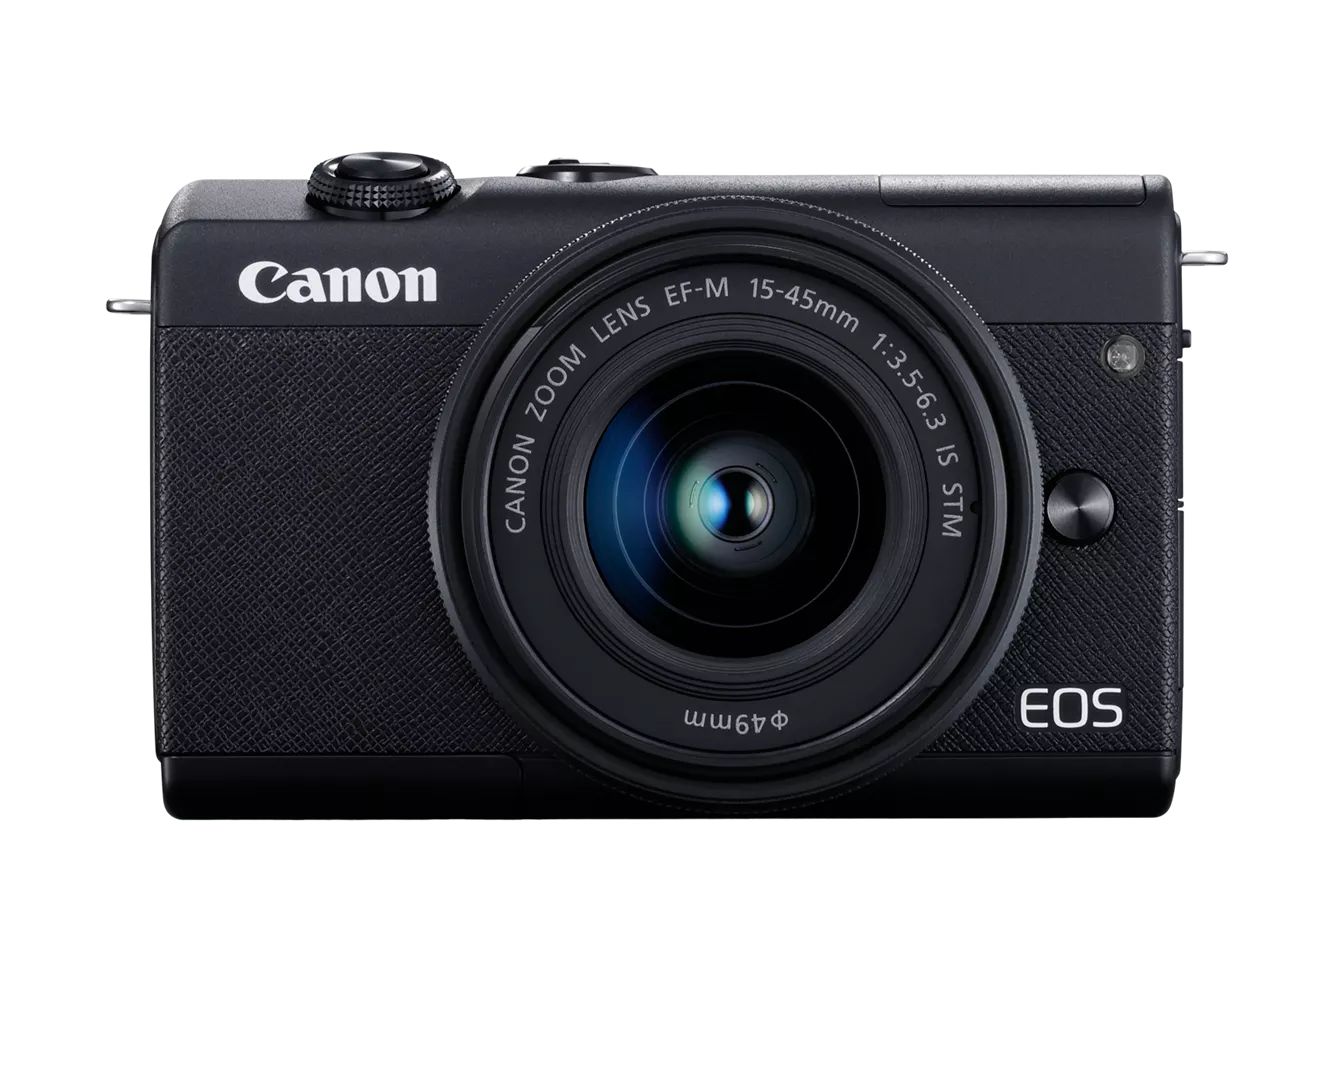 EOS M200 EF-M 15-45mm IS STM Kit | Canon